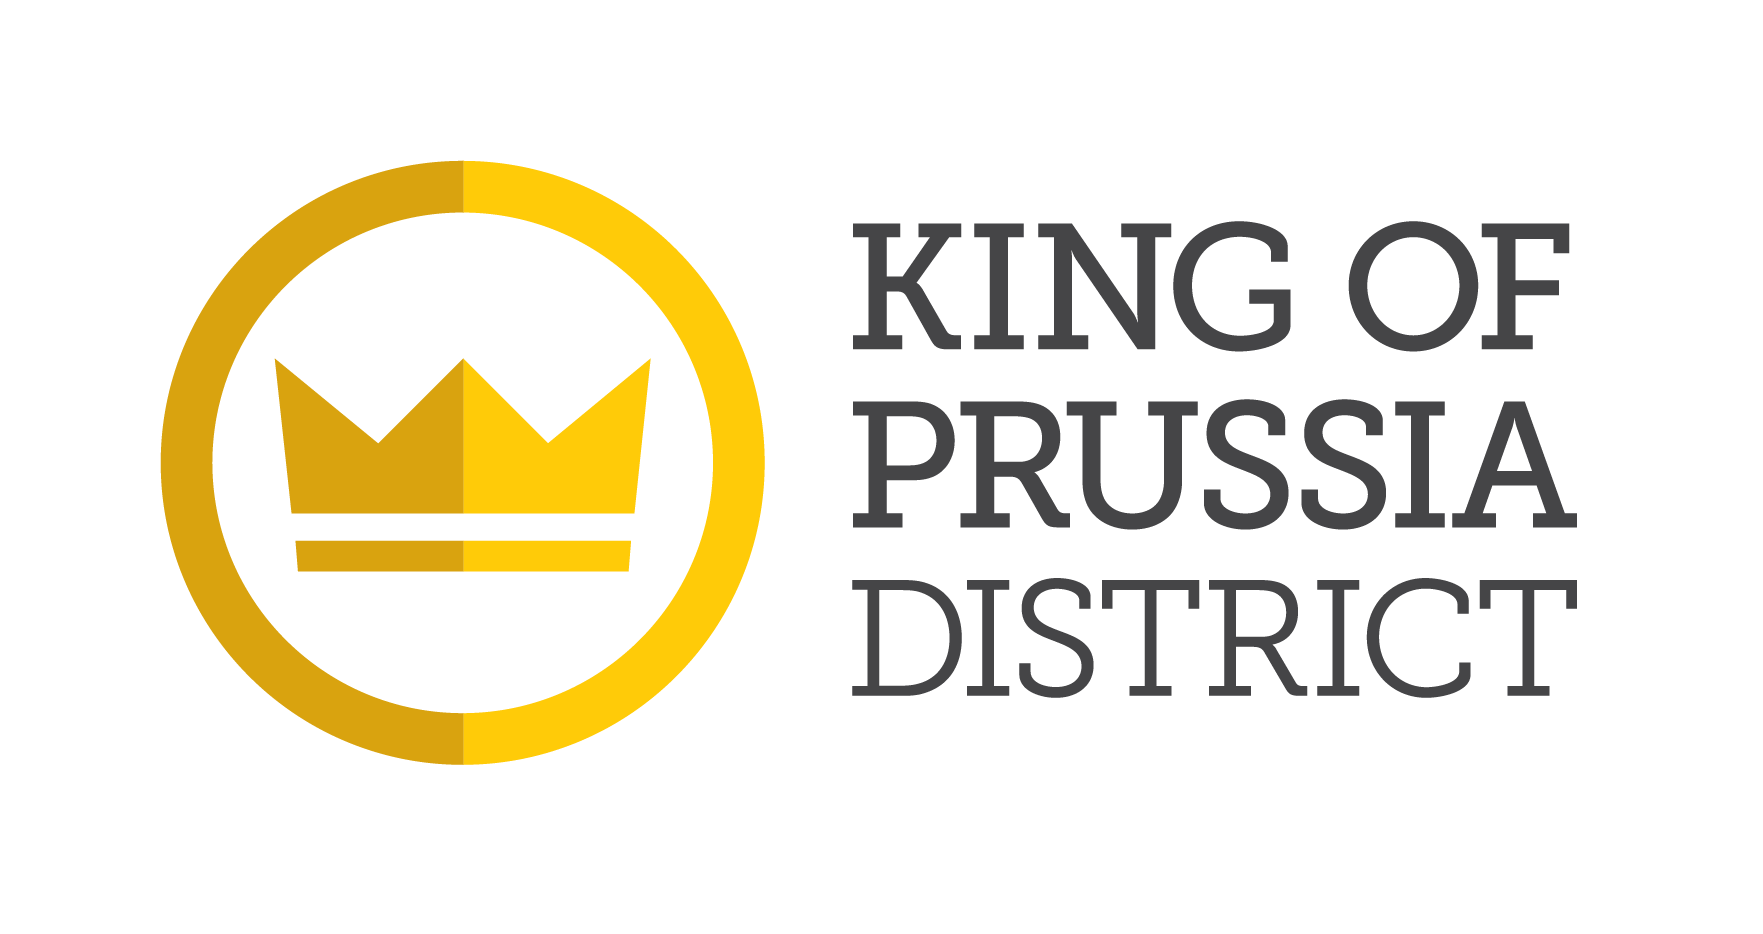 King of Prussia District logo